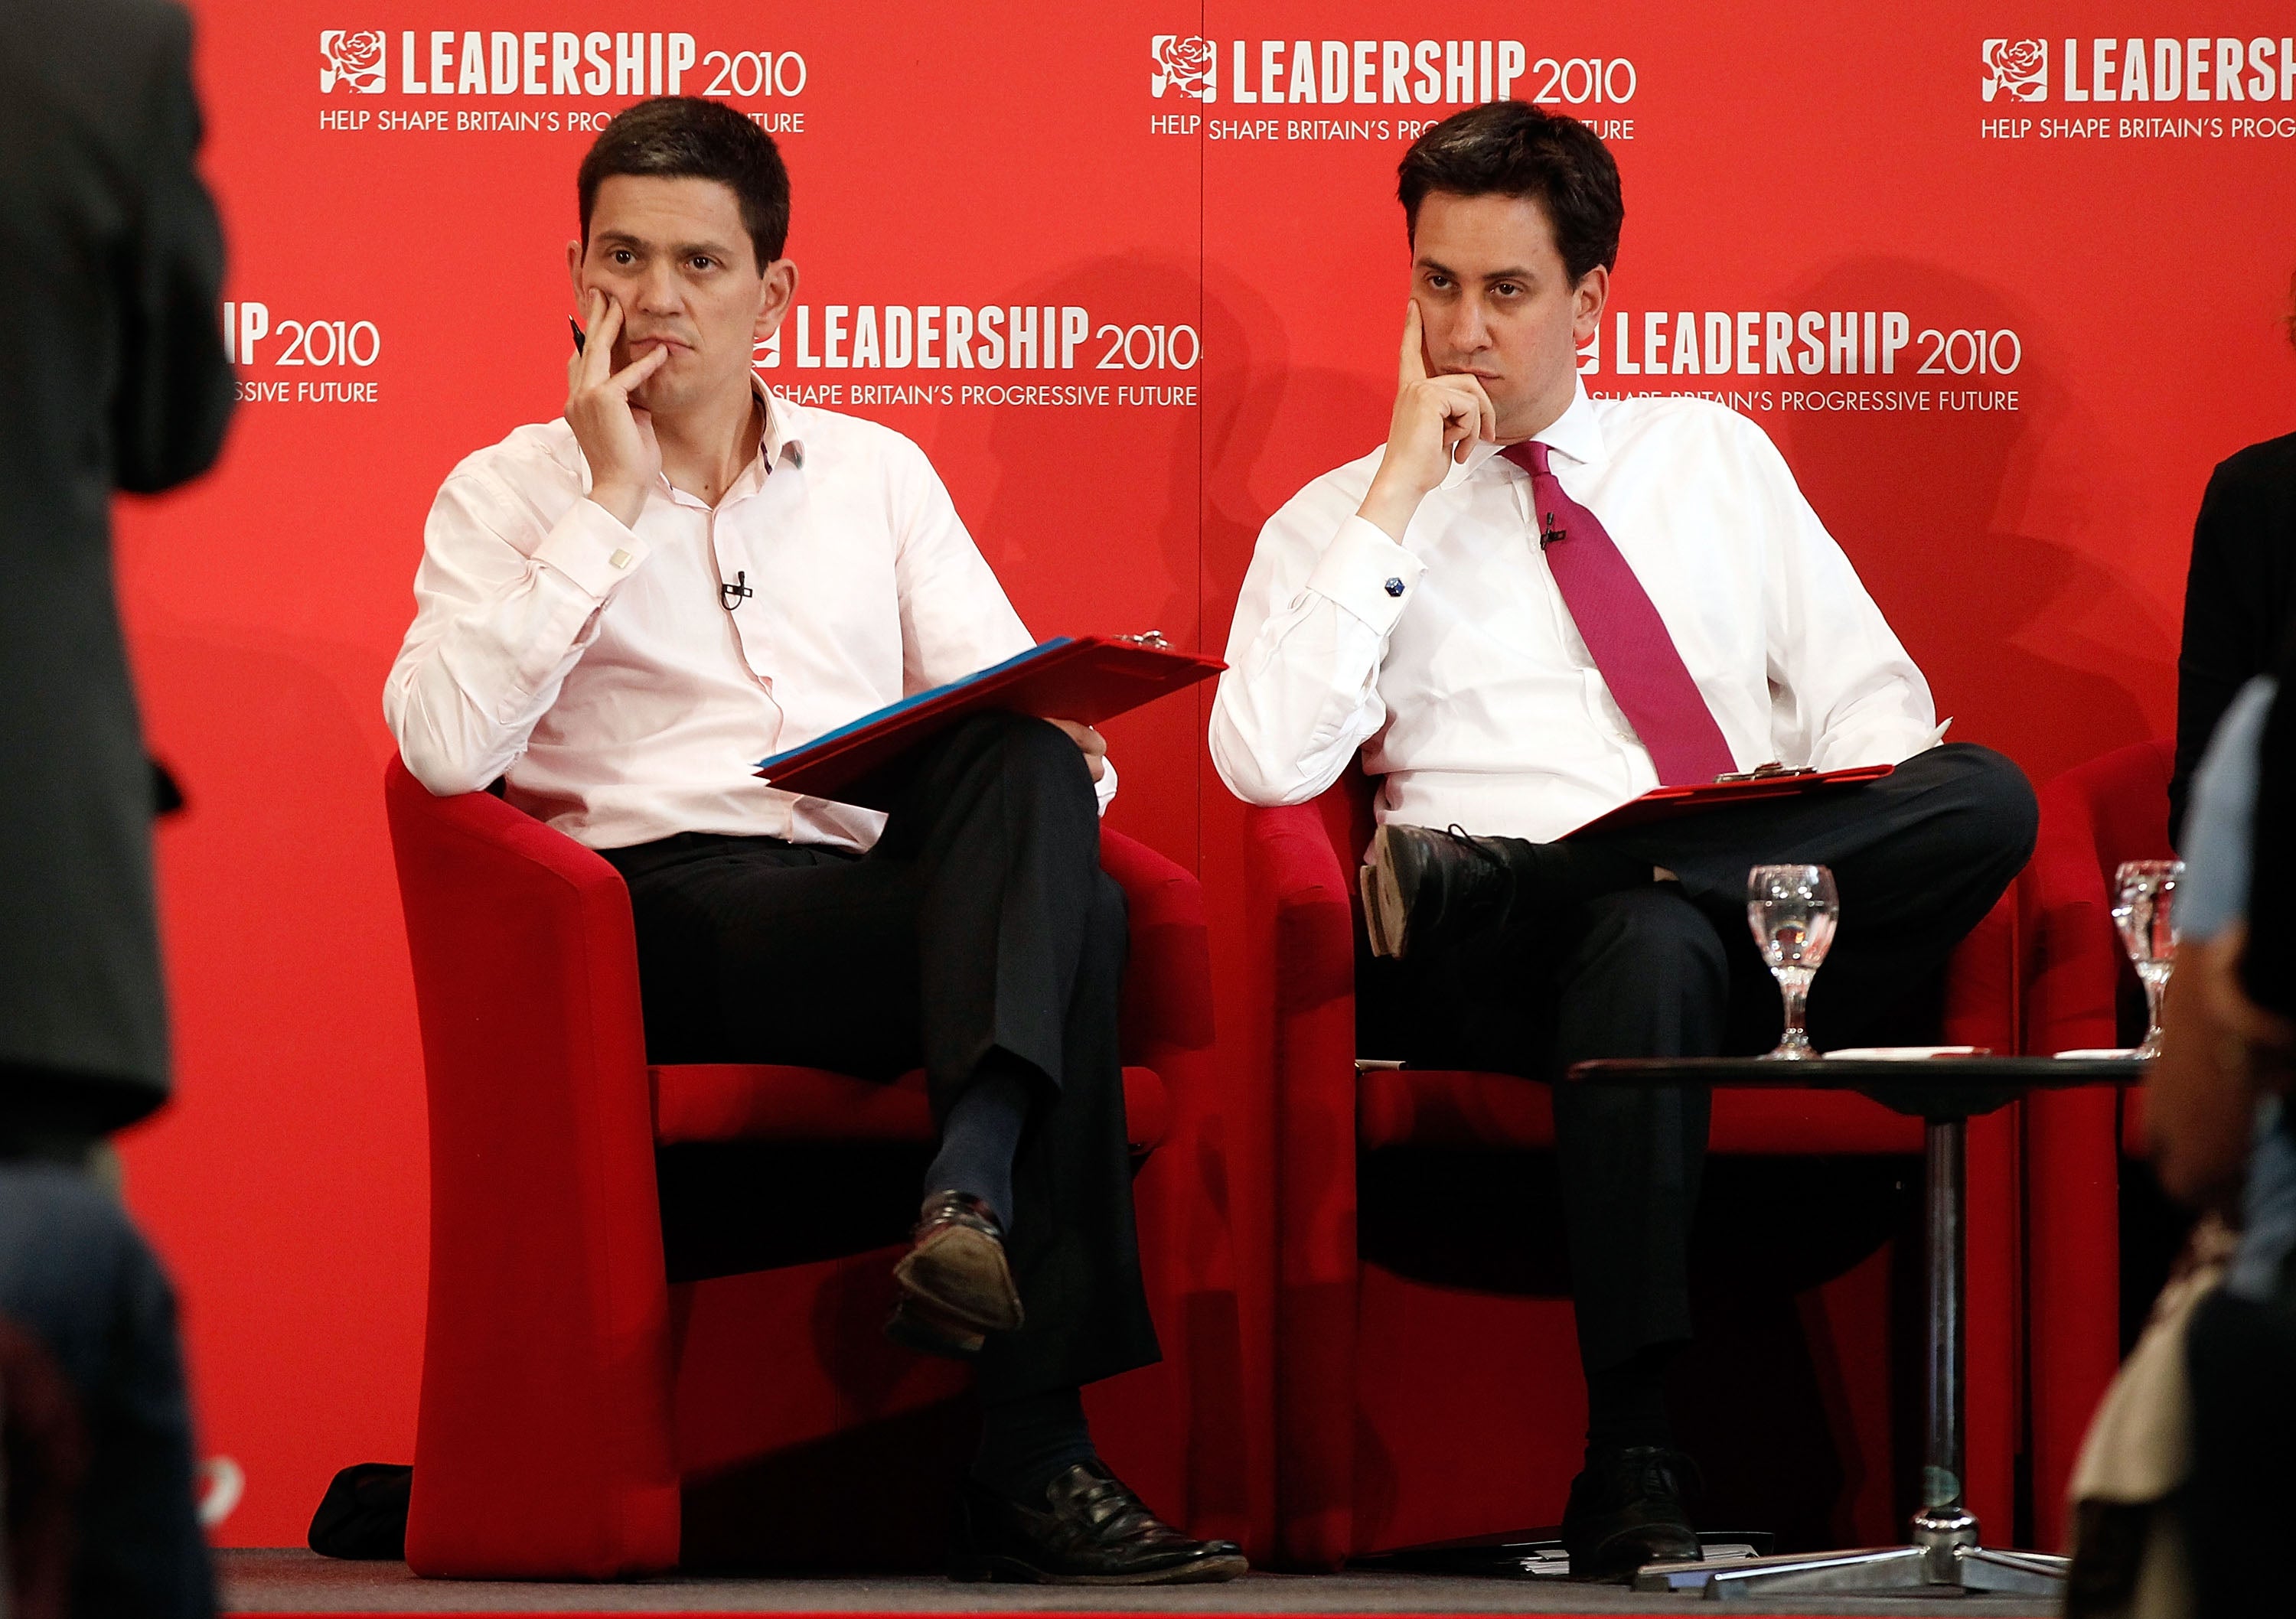 Sibling rivalry in the 2010 Labour leadership campaign